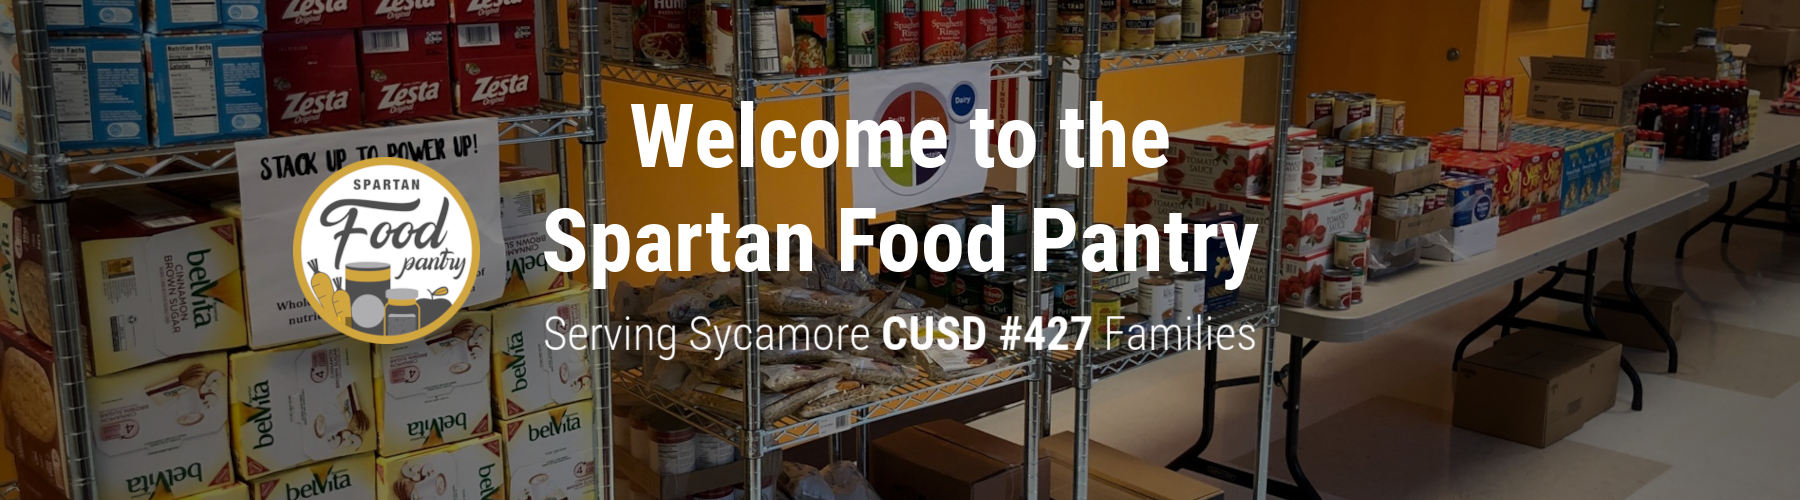 Cornell Food Pantry, Student & Campus Life